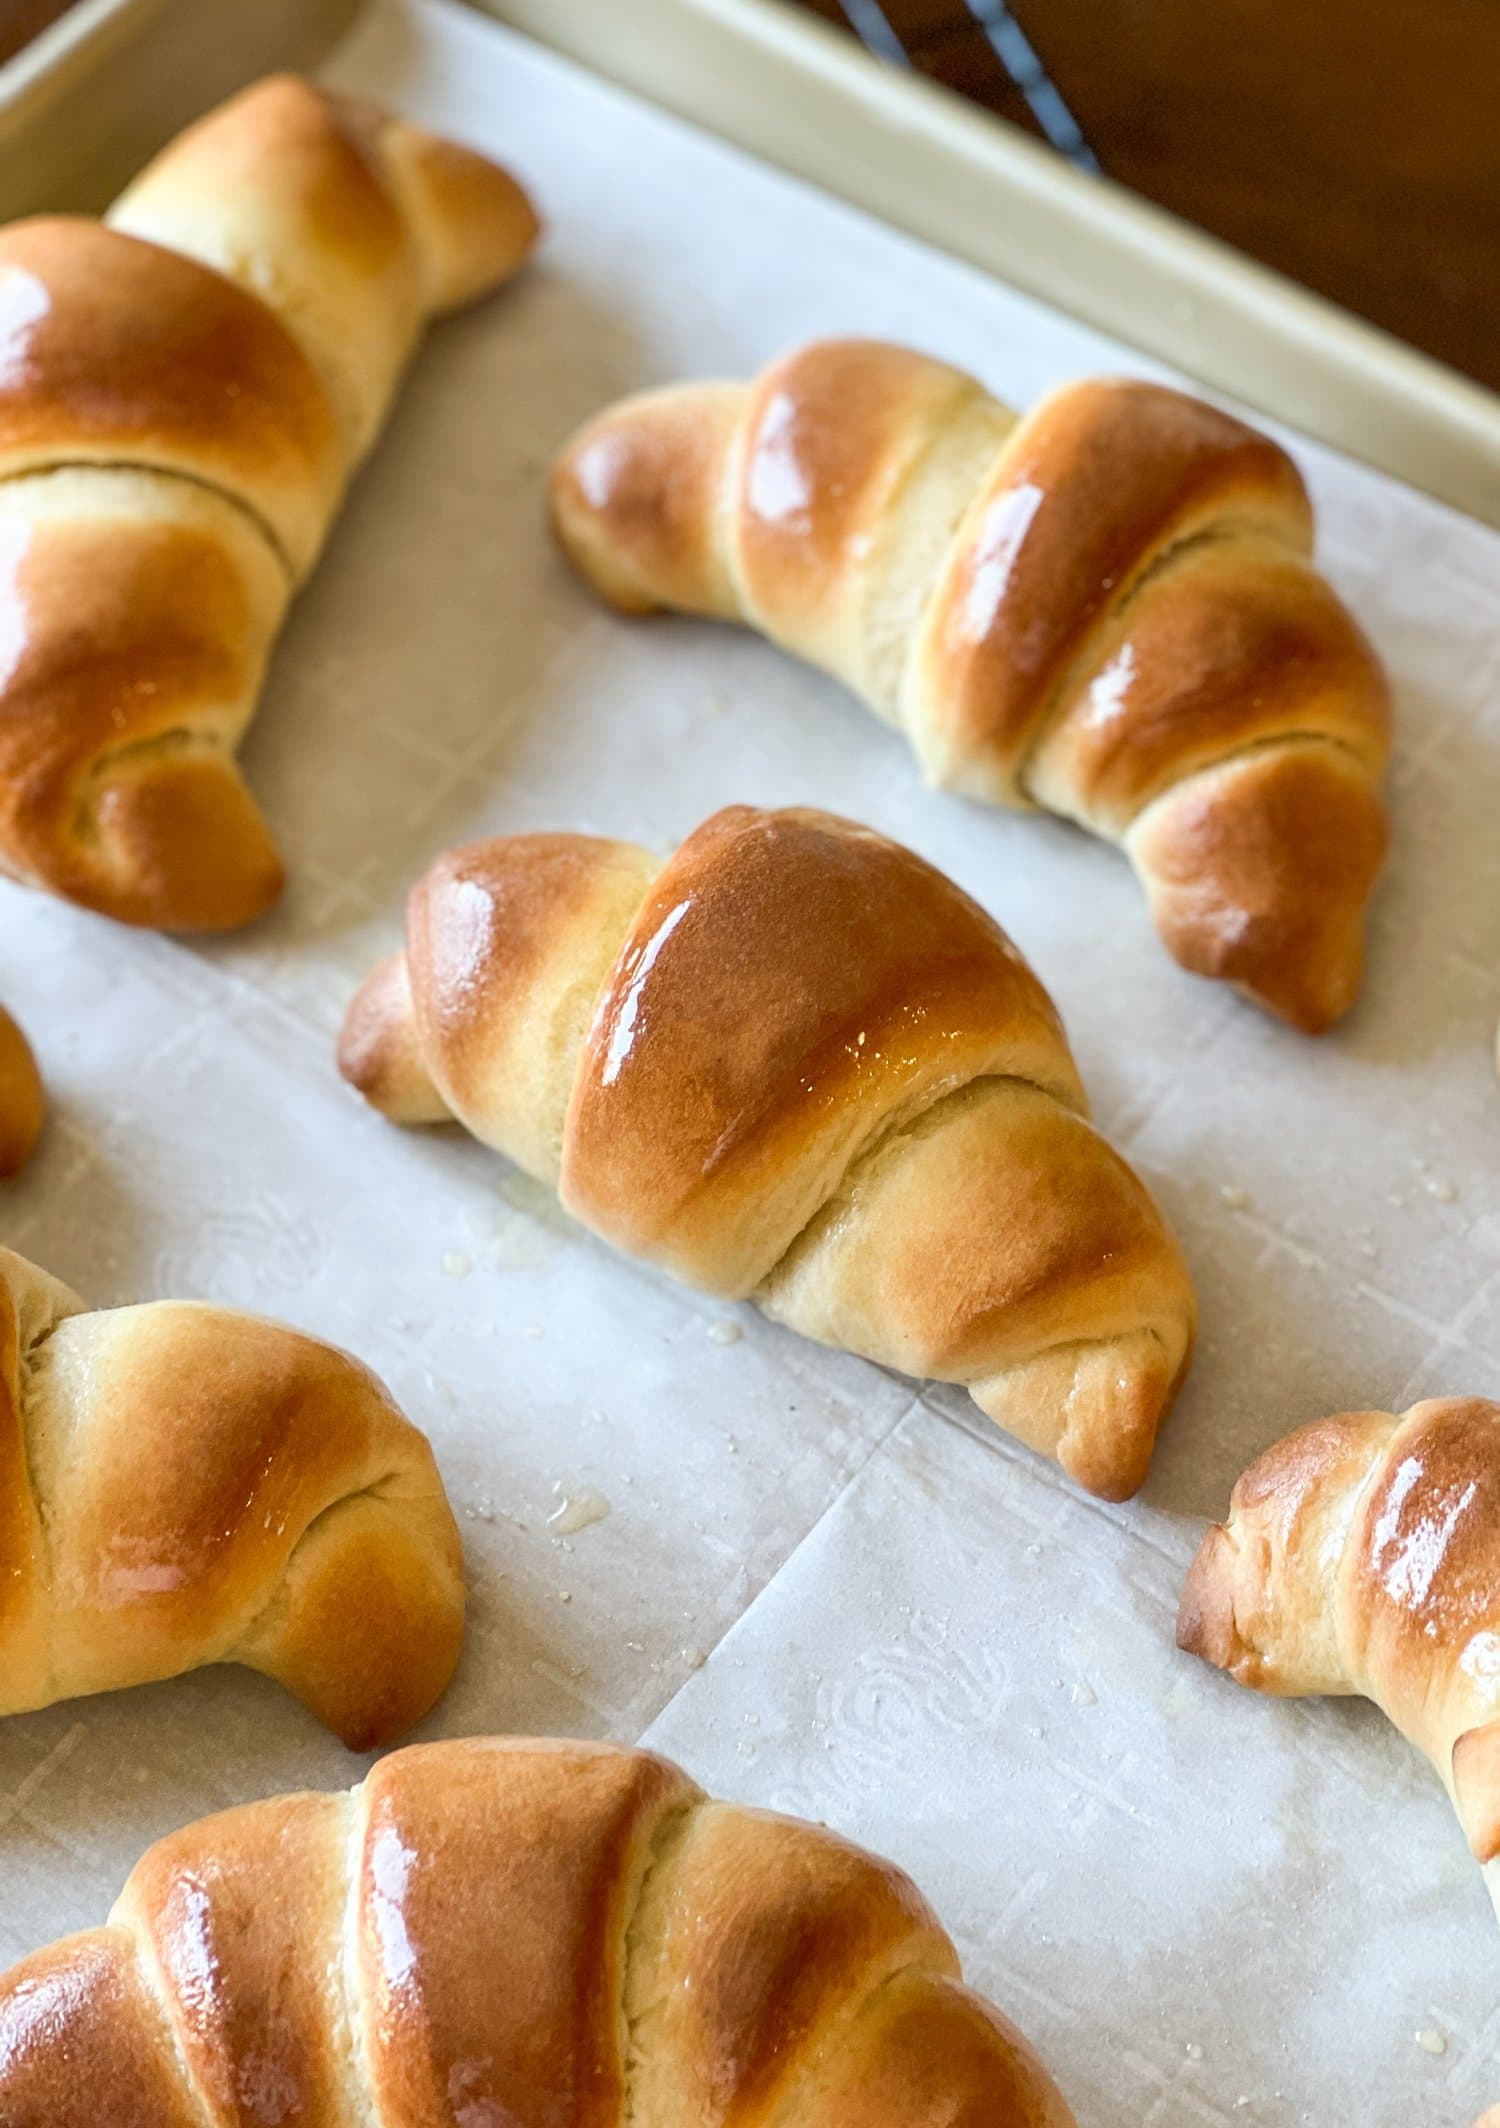 Homemade crescent rolls glazed with butter on a parchment-lined baking sheet.